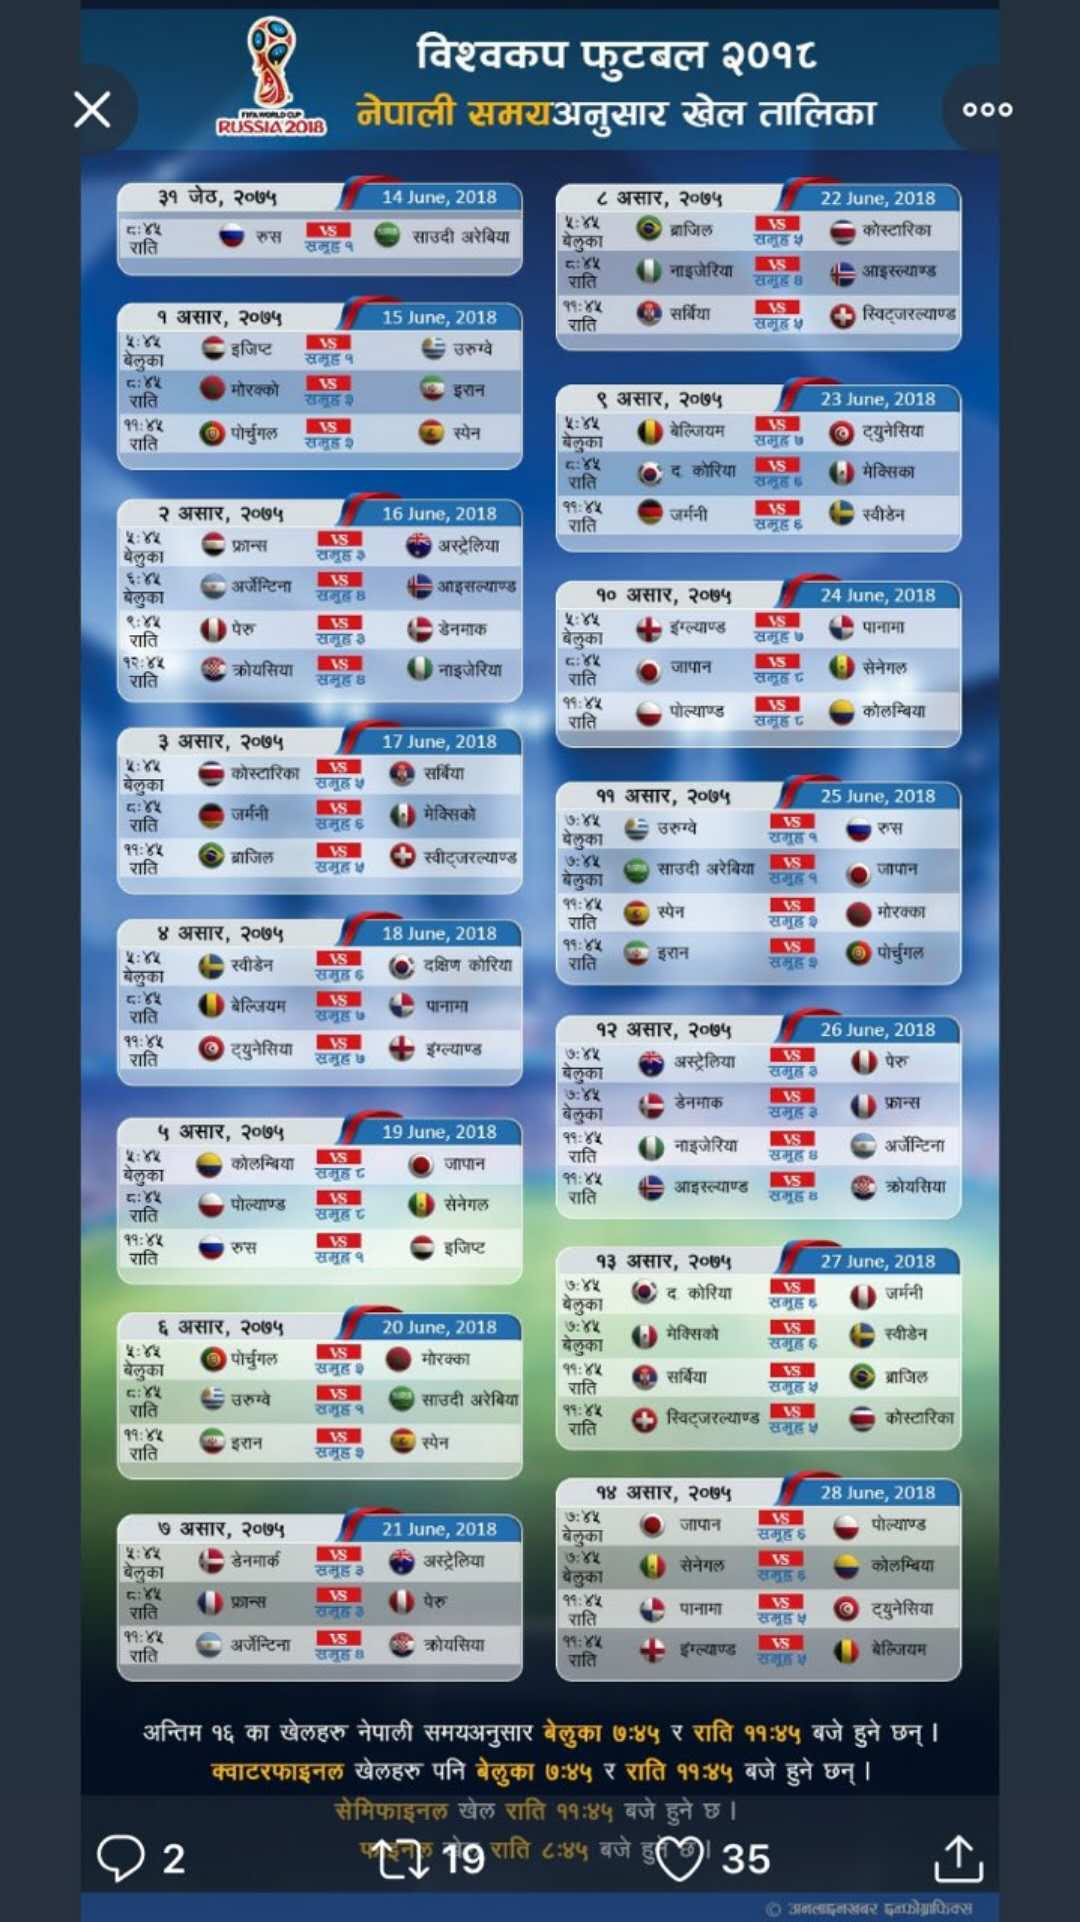 Fifa World cup Football 2018 match schedule in Nepali time and date - NepaliTelecom